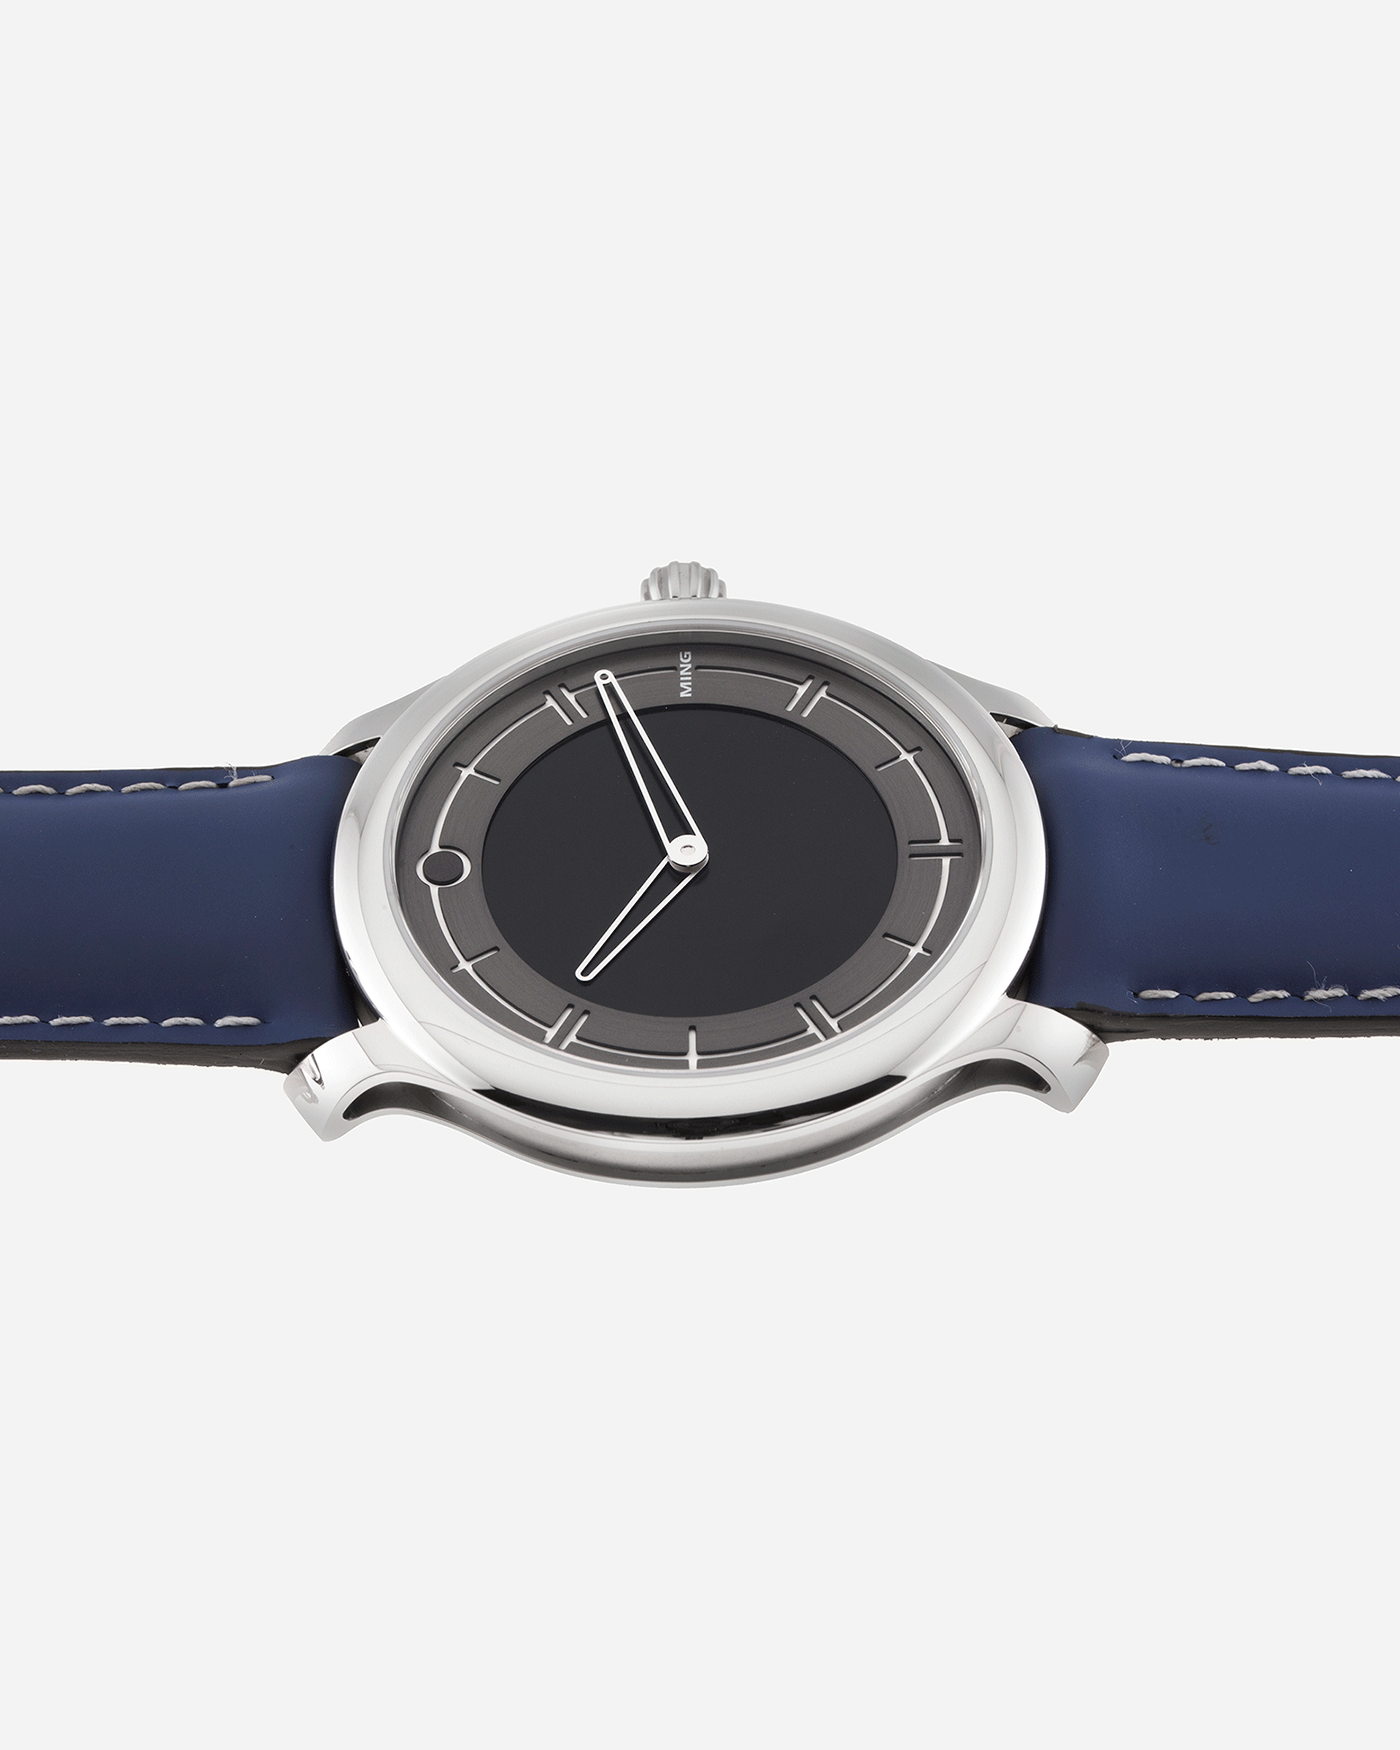 Brand: Ming Year: 2020 Model: 27.01 Material: Stainless Steel Movement: Heavily modified ETA Peseux 7001 Case Diameter: 38mm Strap: Jean Rousseau Blue Rubber for MING